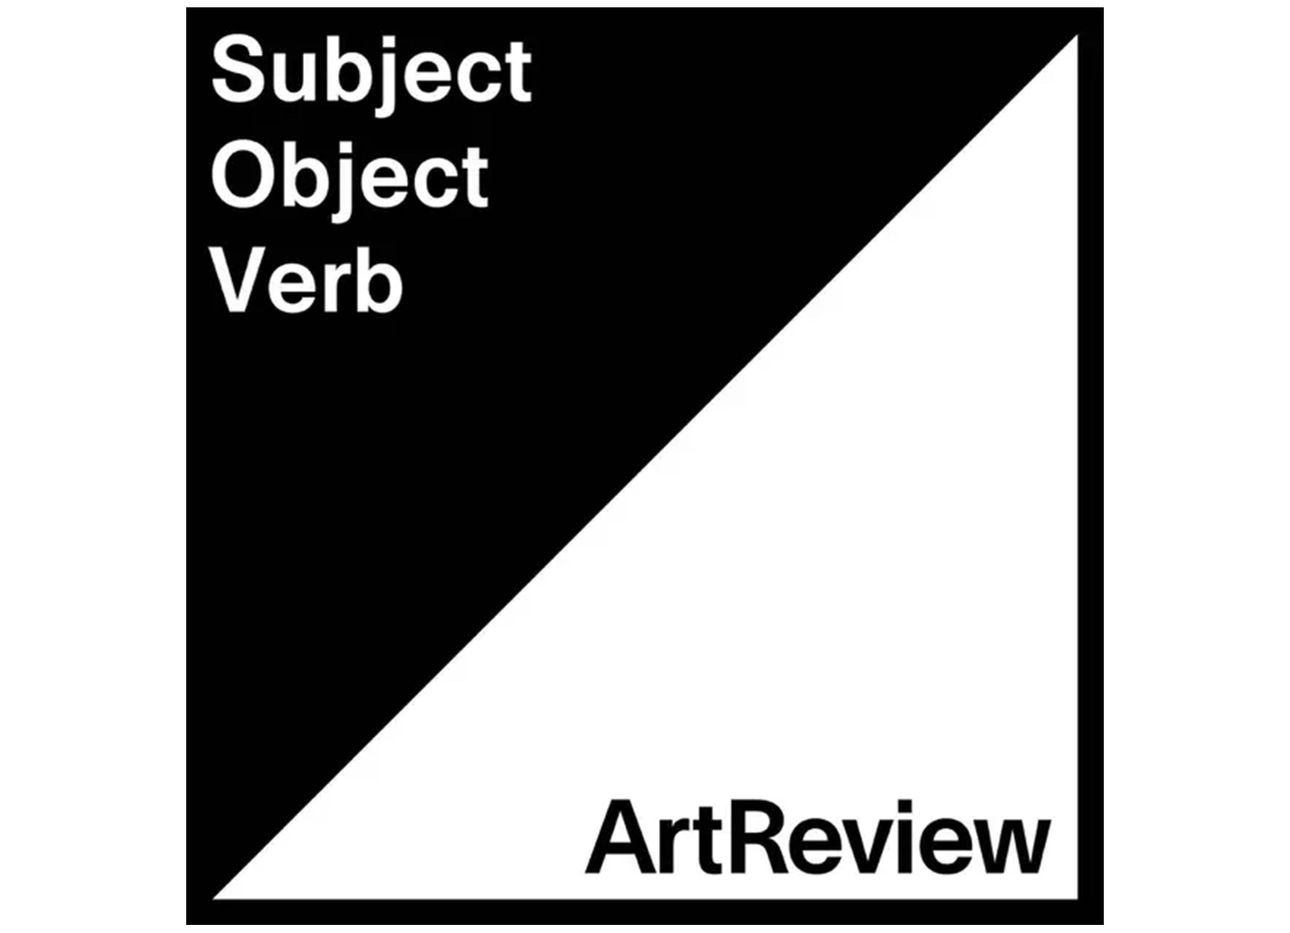 Courtesy ArtReview